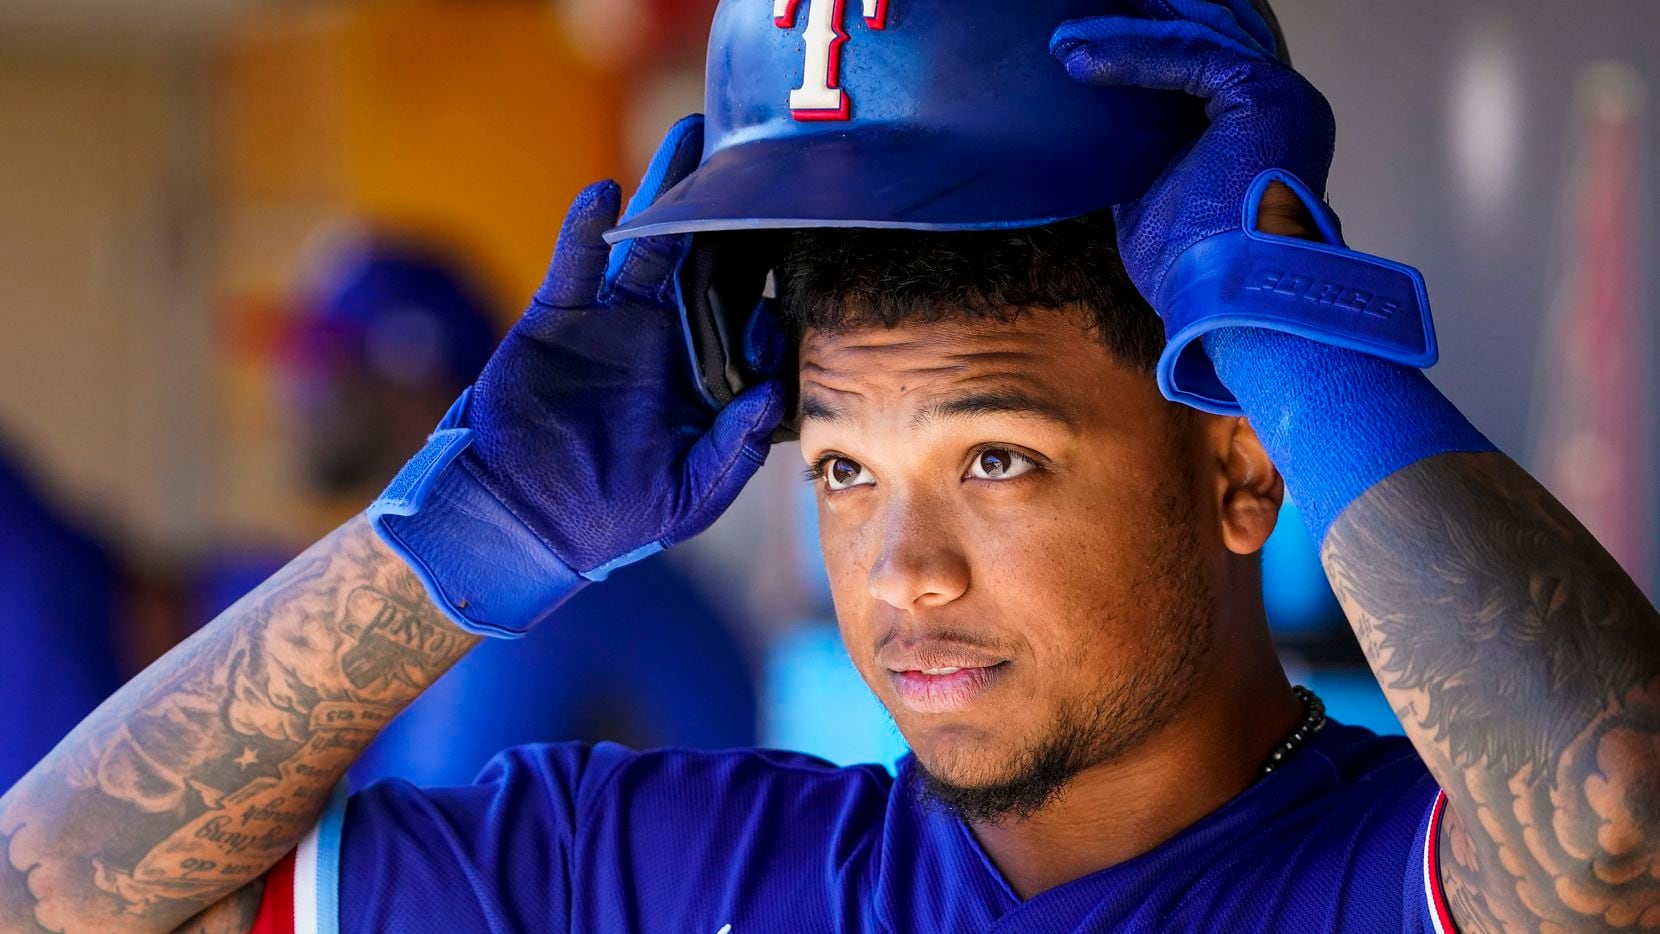 Texas Rangers outfielder Willie Calhoun puts on his batting helmet in the dugout before a...